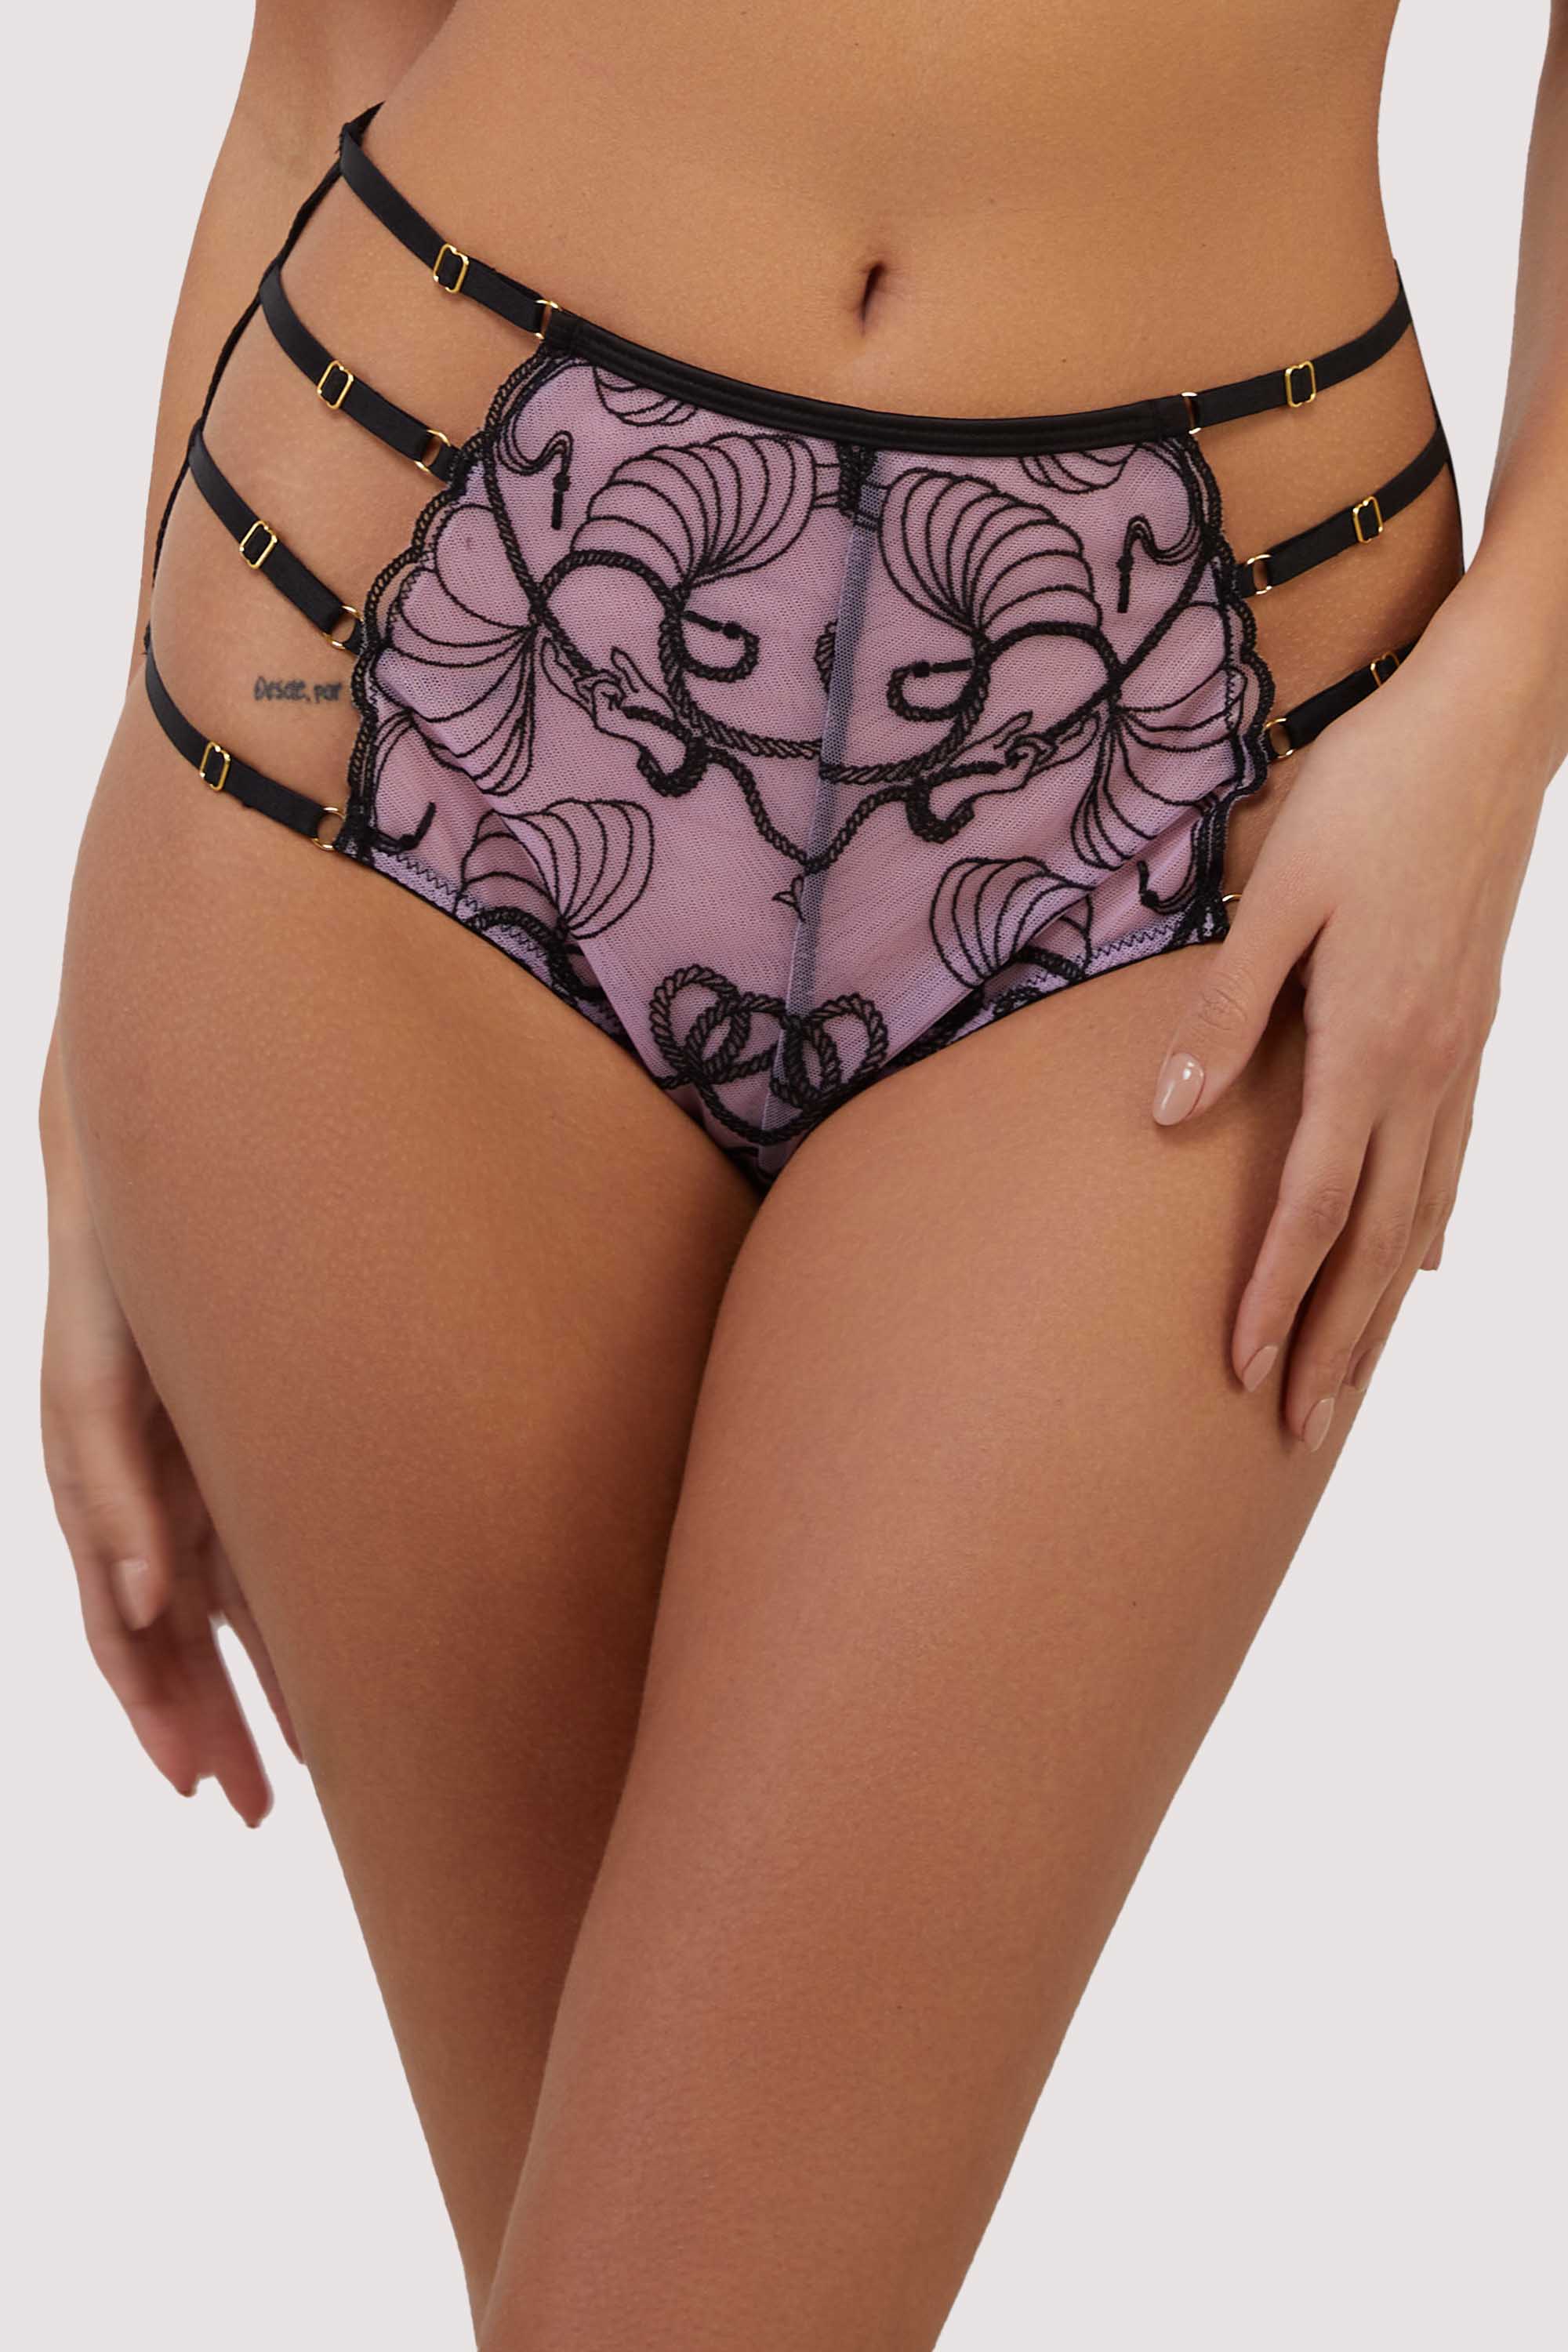 Jessie Pink and Black Whip Embroidery High Waist Brief 16